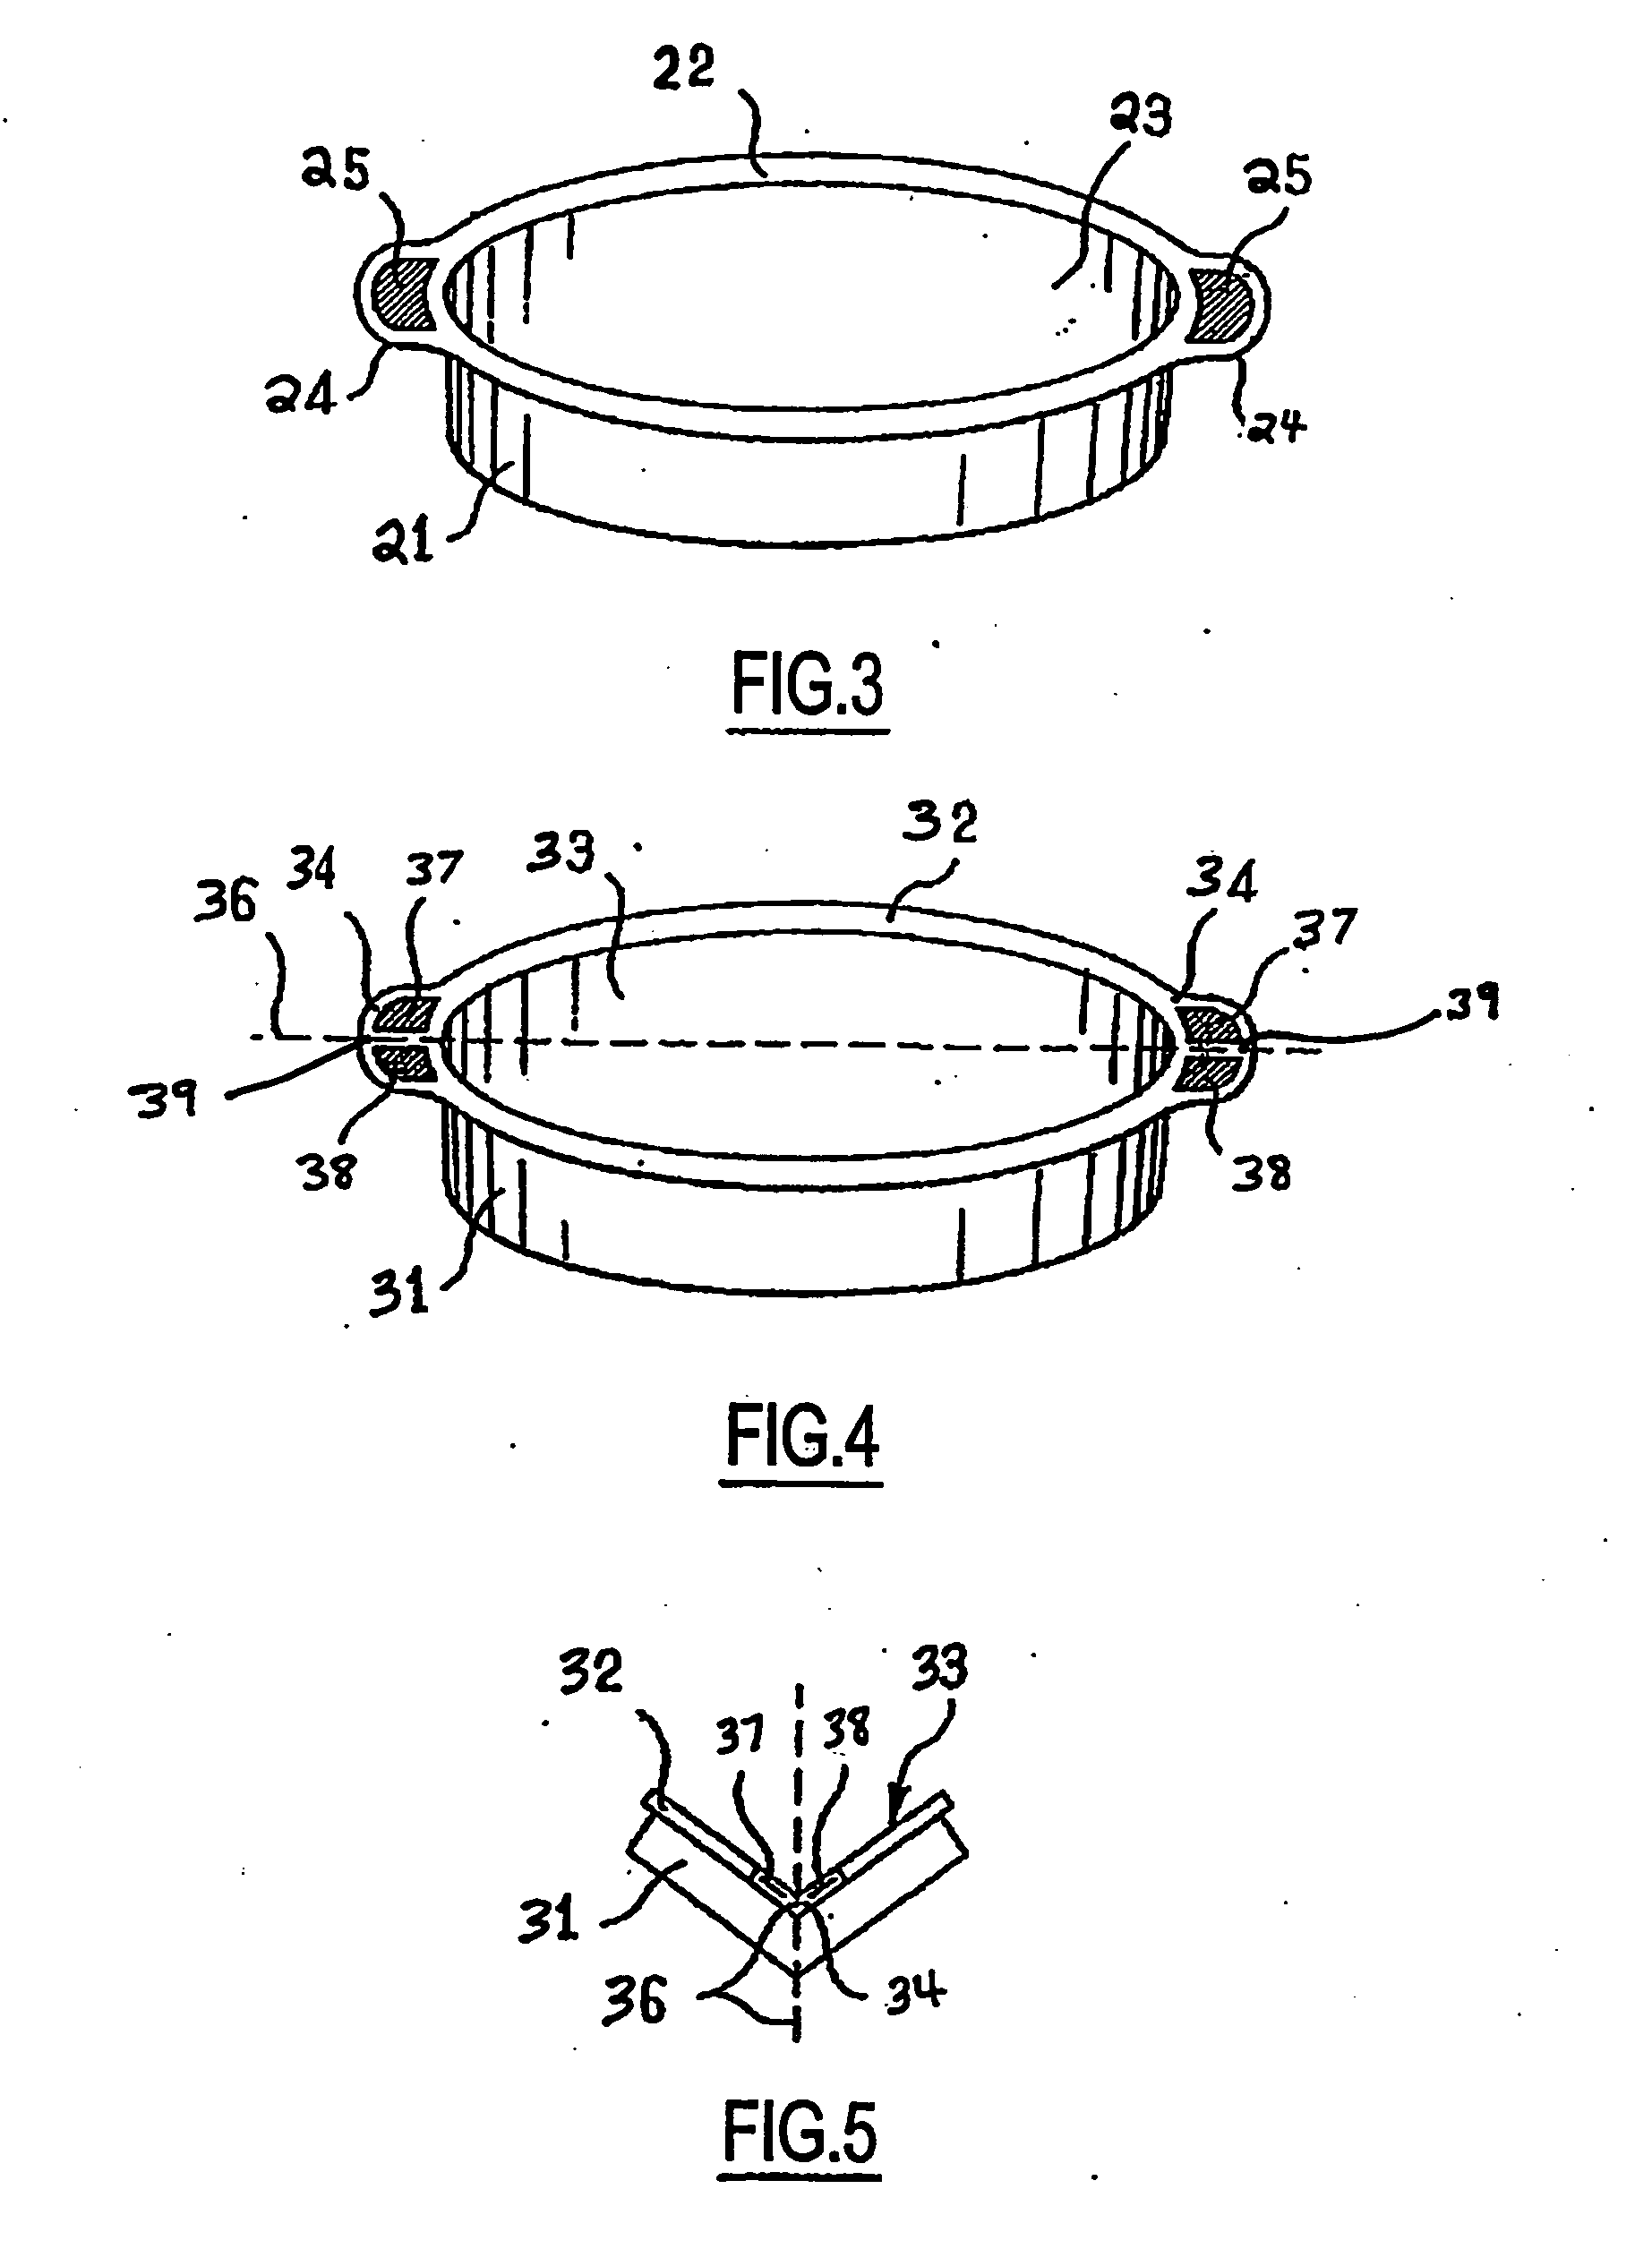 Flexible mold with grasping handles